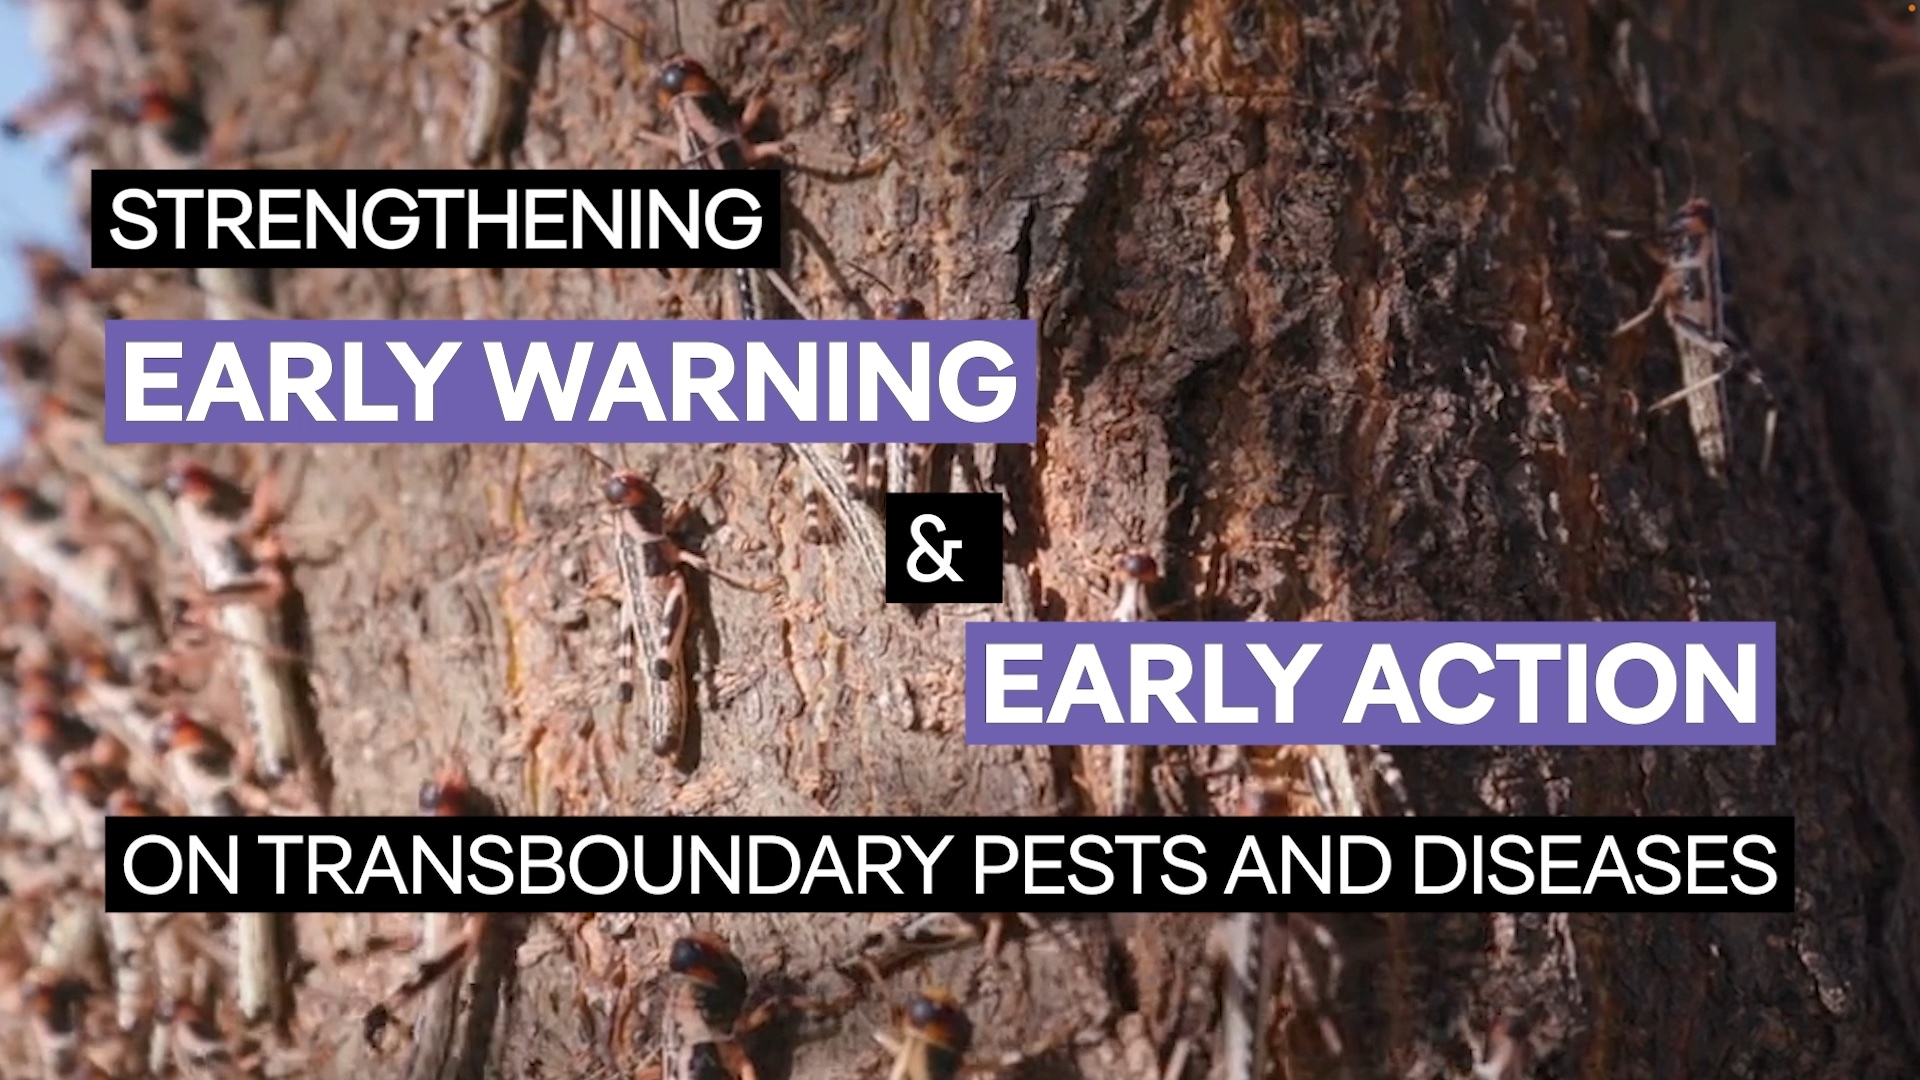 Strengthening Early Warning & Early Action on Transboundary Pests and Diseases